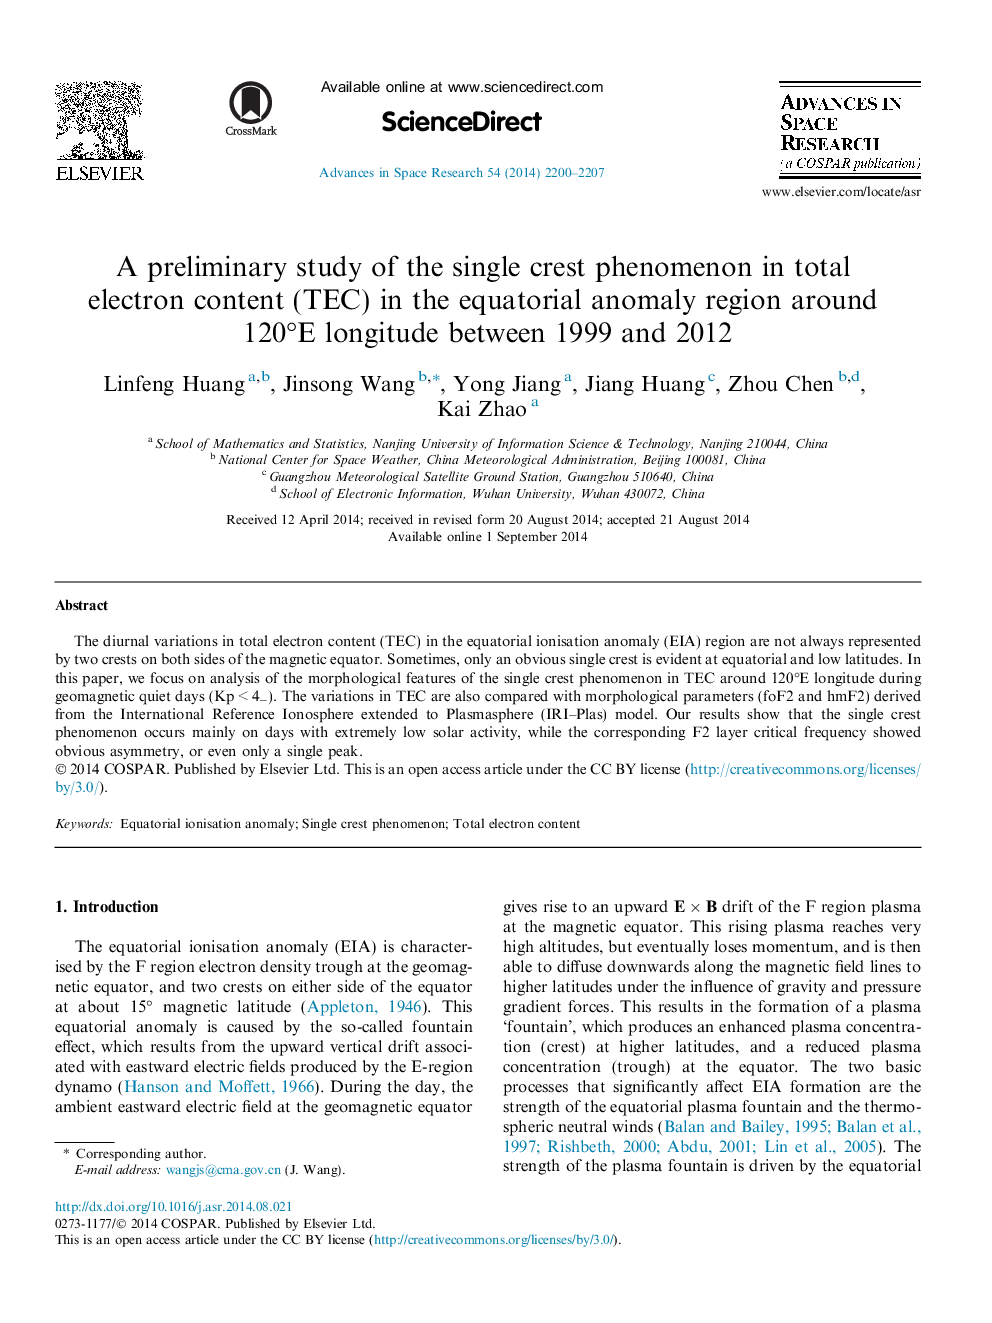 A preliminary study of the single crest phenomenon in total electron content (TEC) in the equatorial anomaly region around 120Â°E longitude between 1999 and 2012